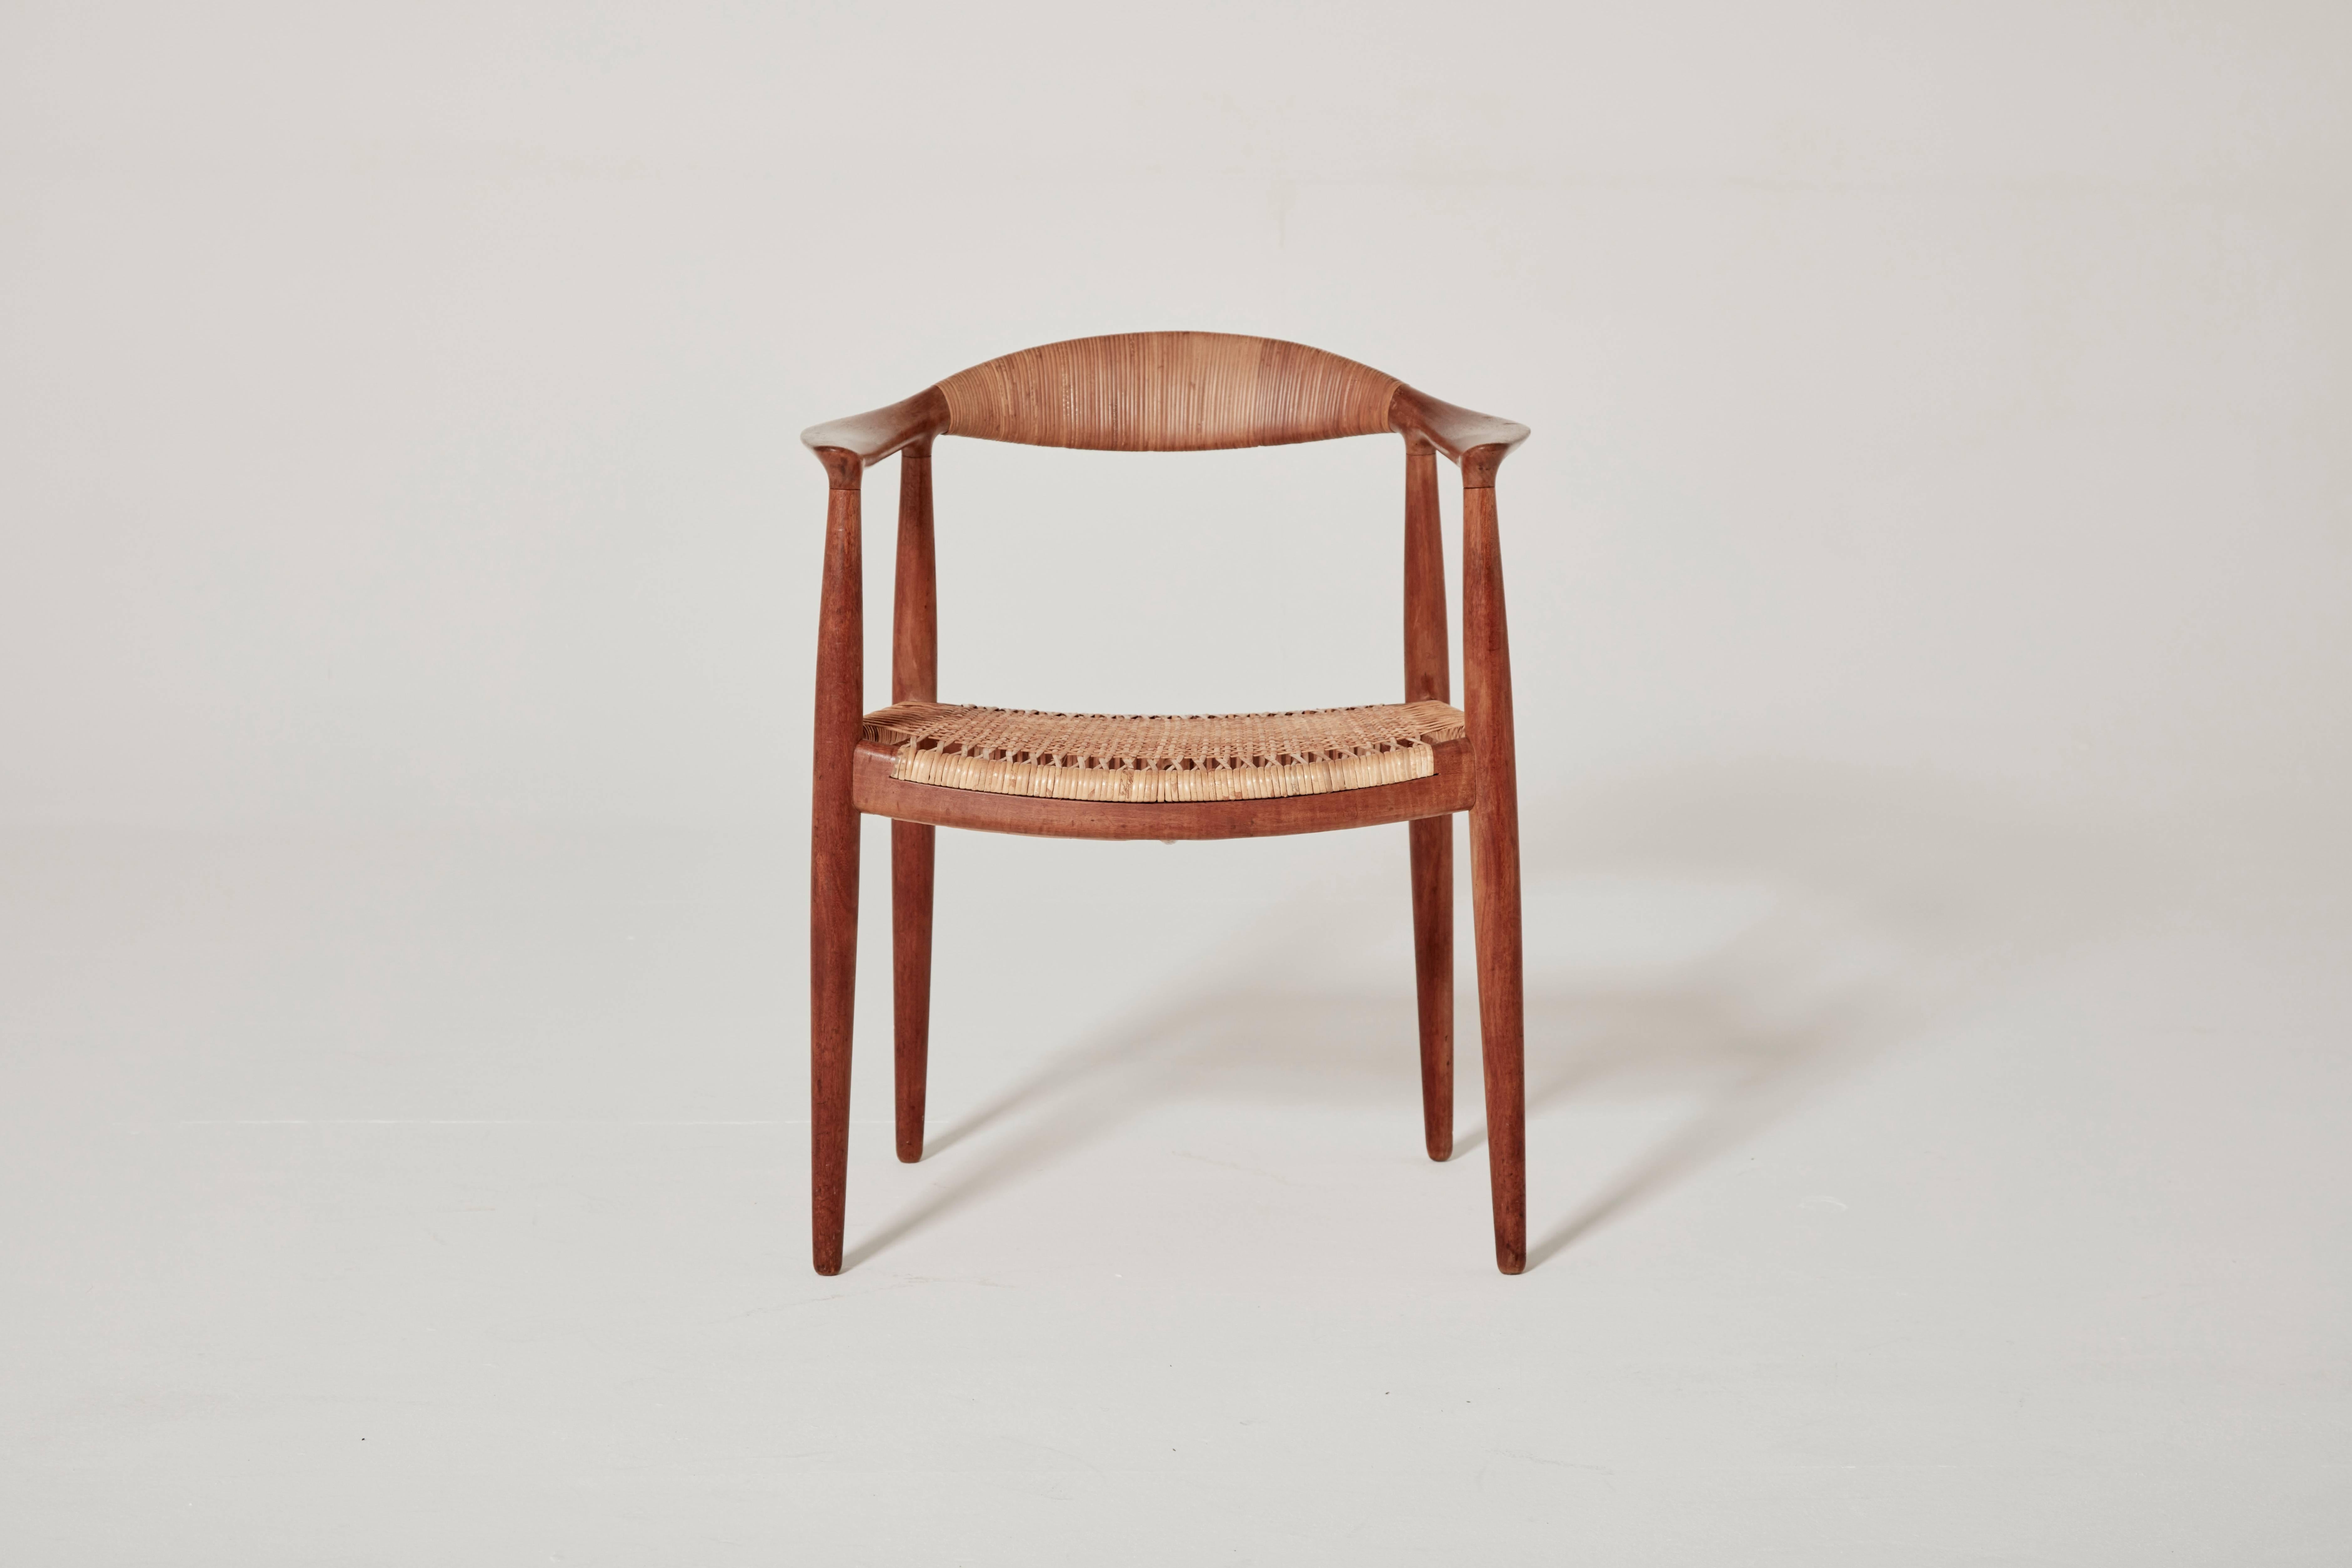 Hans Wegner's iconic 'The Chair', designed in 1949, model JH 501, made by Johannes Hansen, Denmark.  This is the earliest version in mahogany with cane seat and backrest.  Branded with makers mark.  Ships worldwide - please contact us for options.